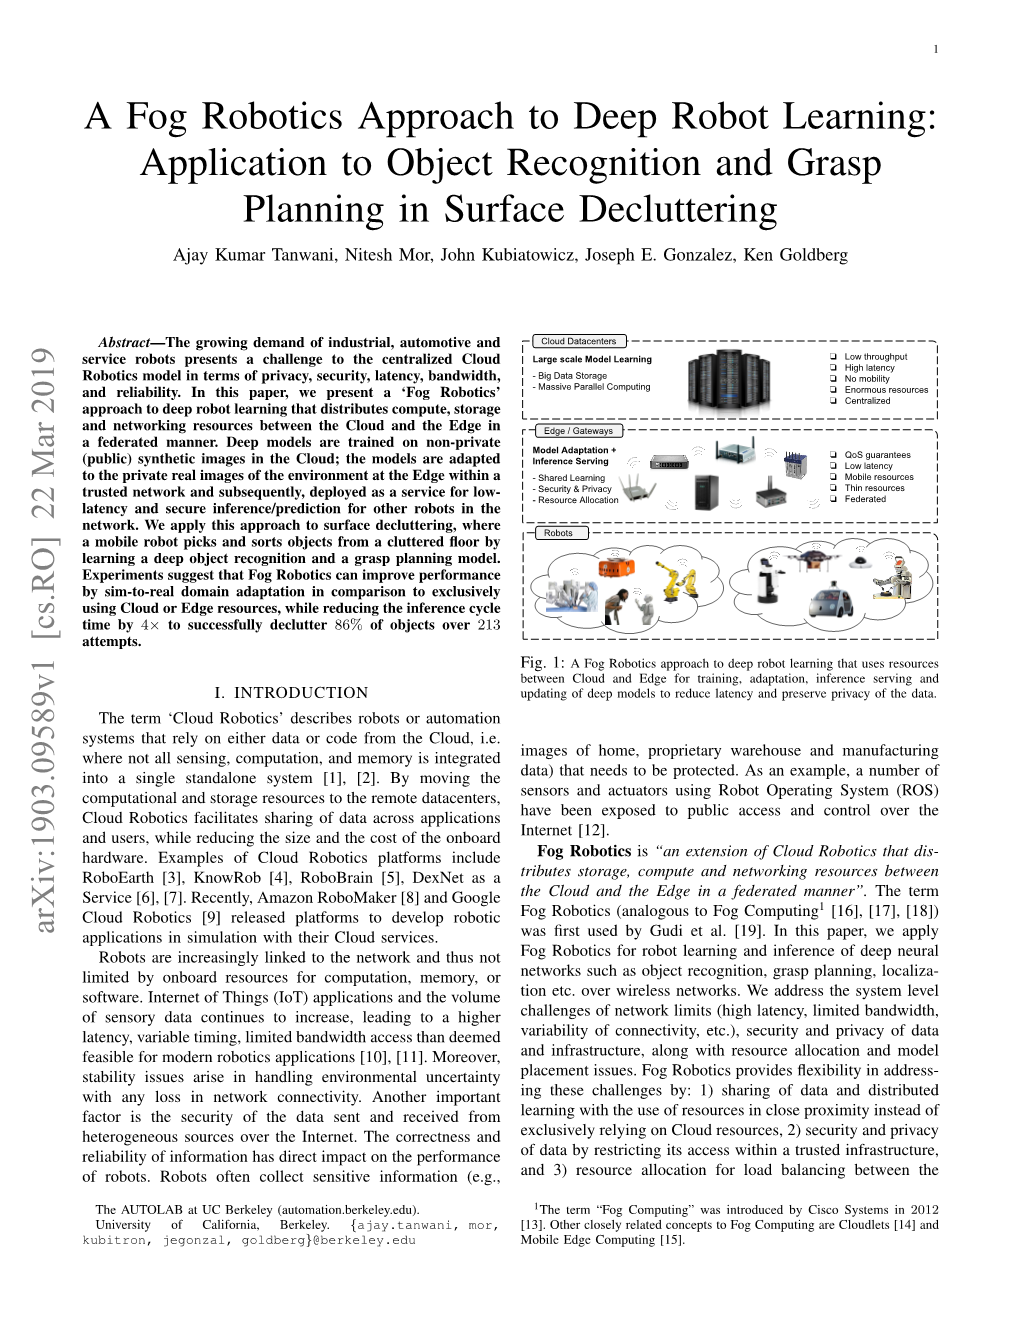 A Fog Robotics Approach to Deep Robot Learning: Application to Object Recognition and Grasp Planning in Surface Decluttering